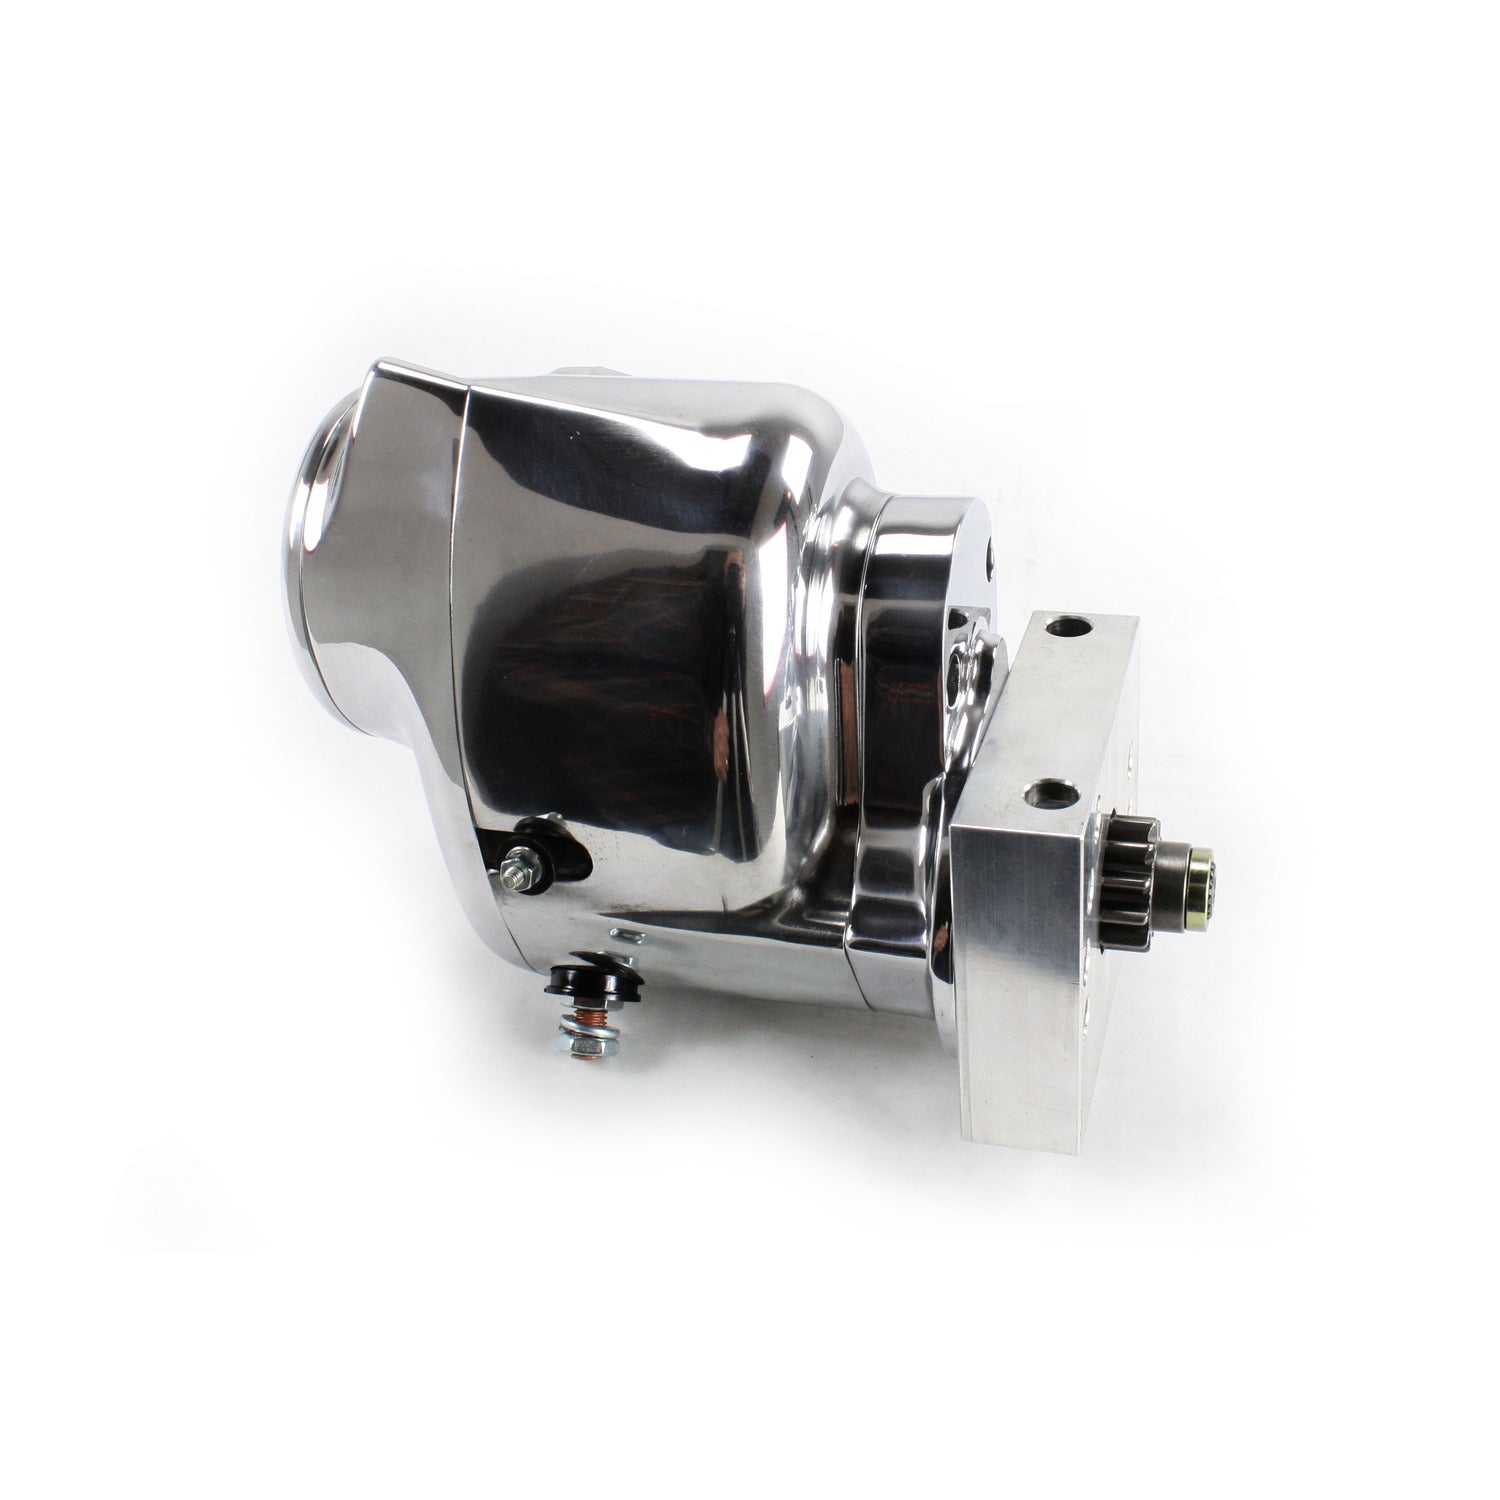 Pertronix part number S3002P Contour Starter GM LS engines with polished finish